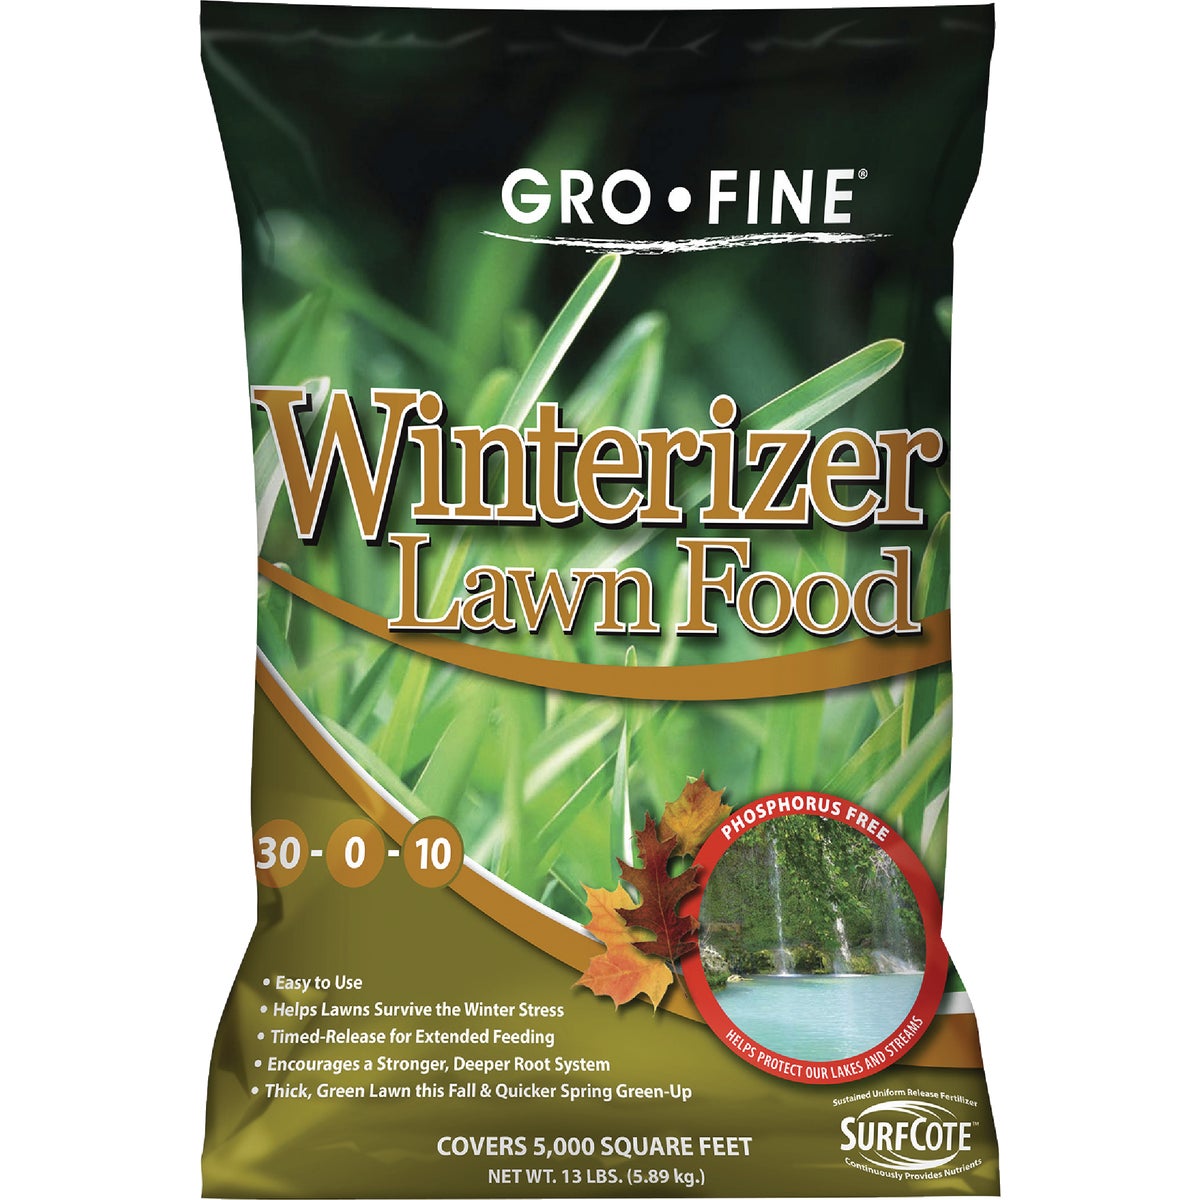 Item 768093, Winterizer lawn food featuring a phosphorus free formula to help protect 